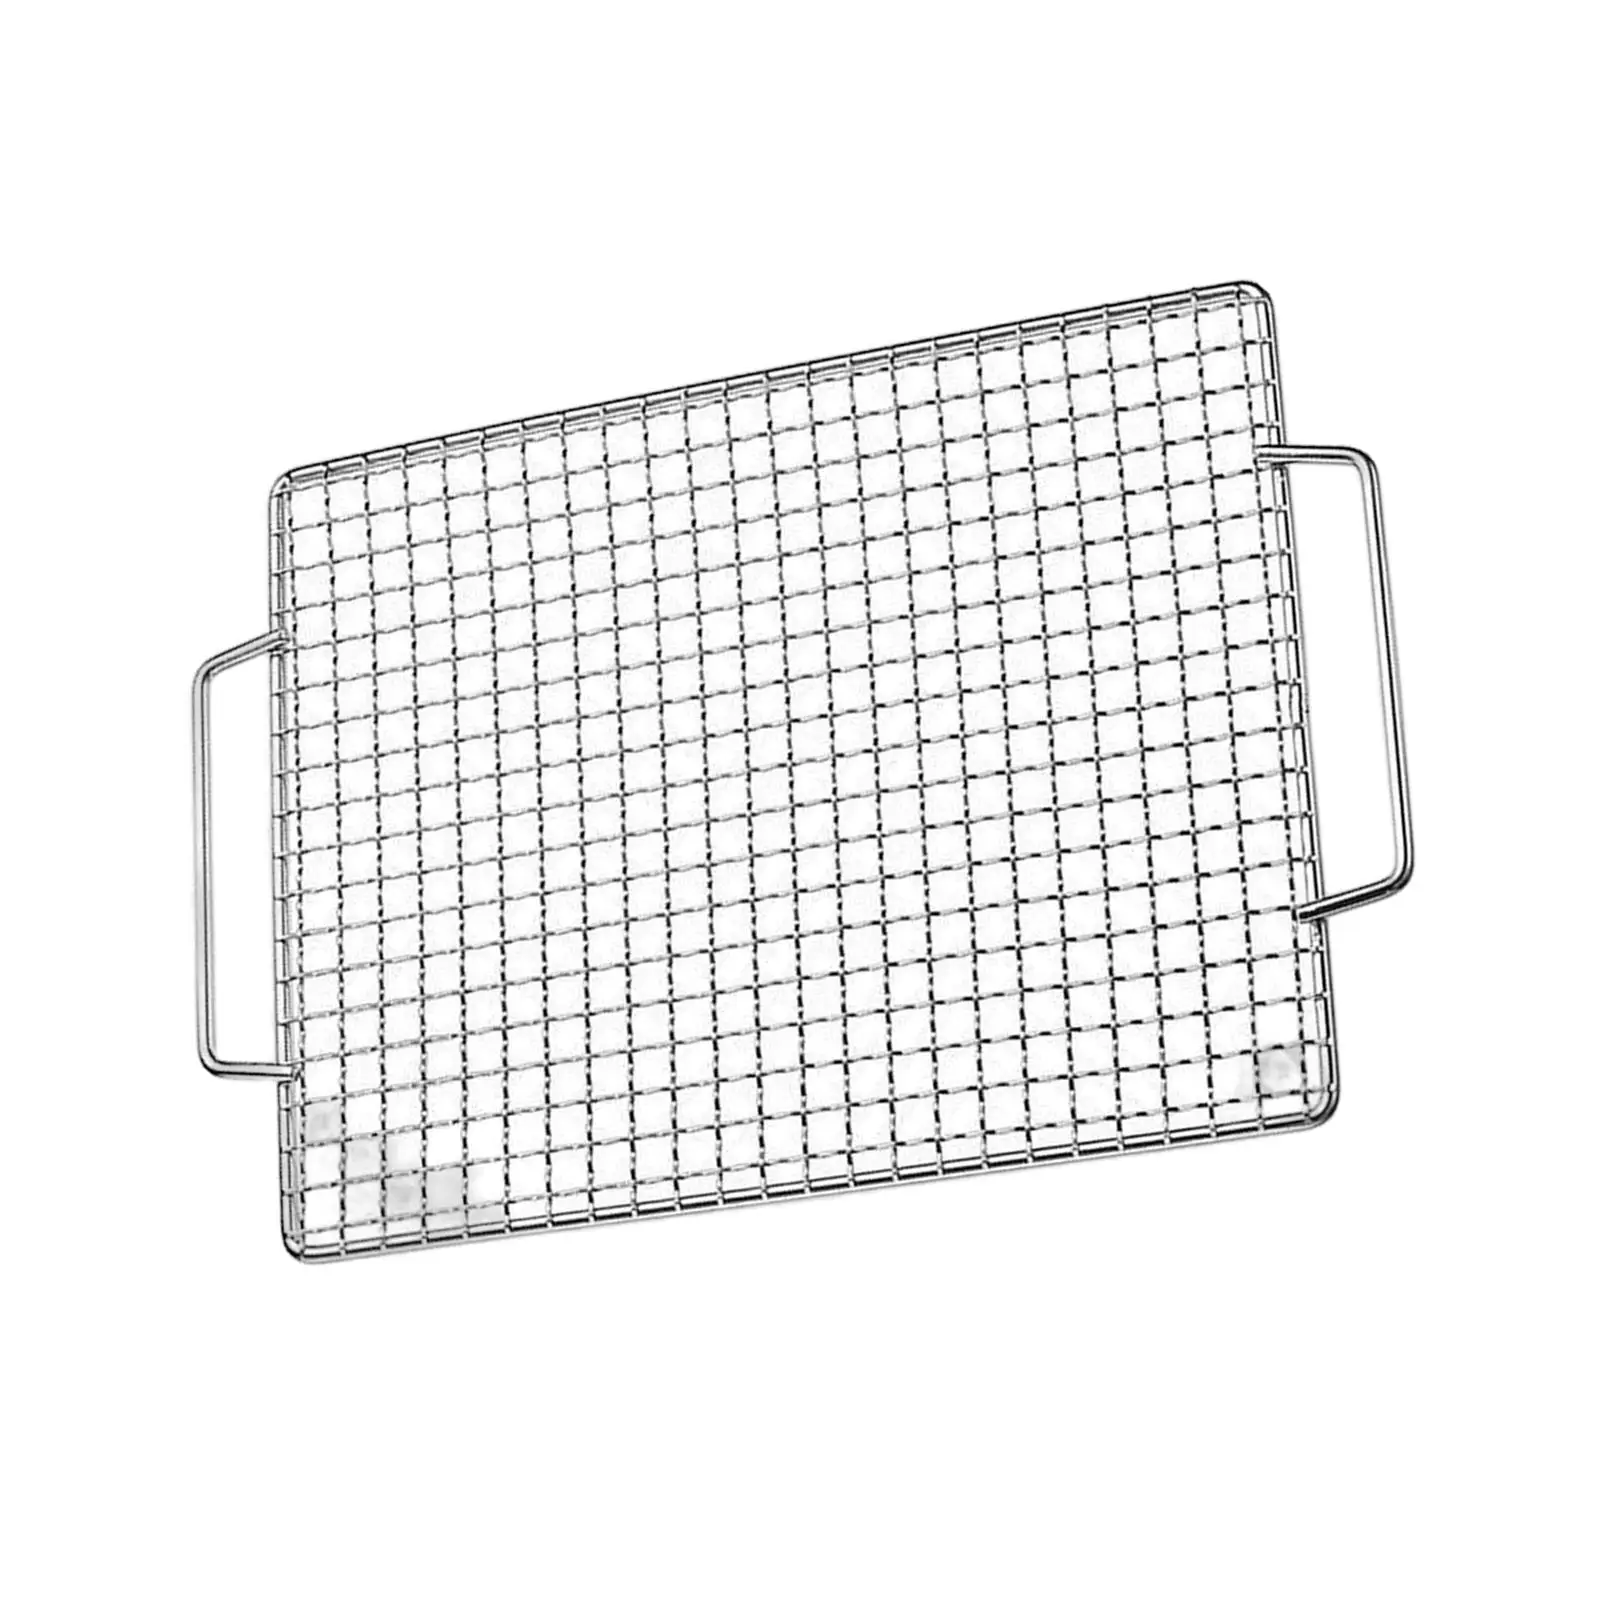 Multipurpose Barbecue Grill Net Mesh Rack for Hiking Camping Accessories